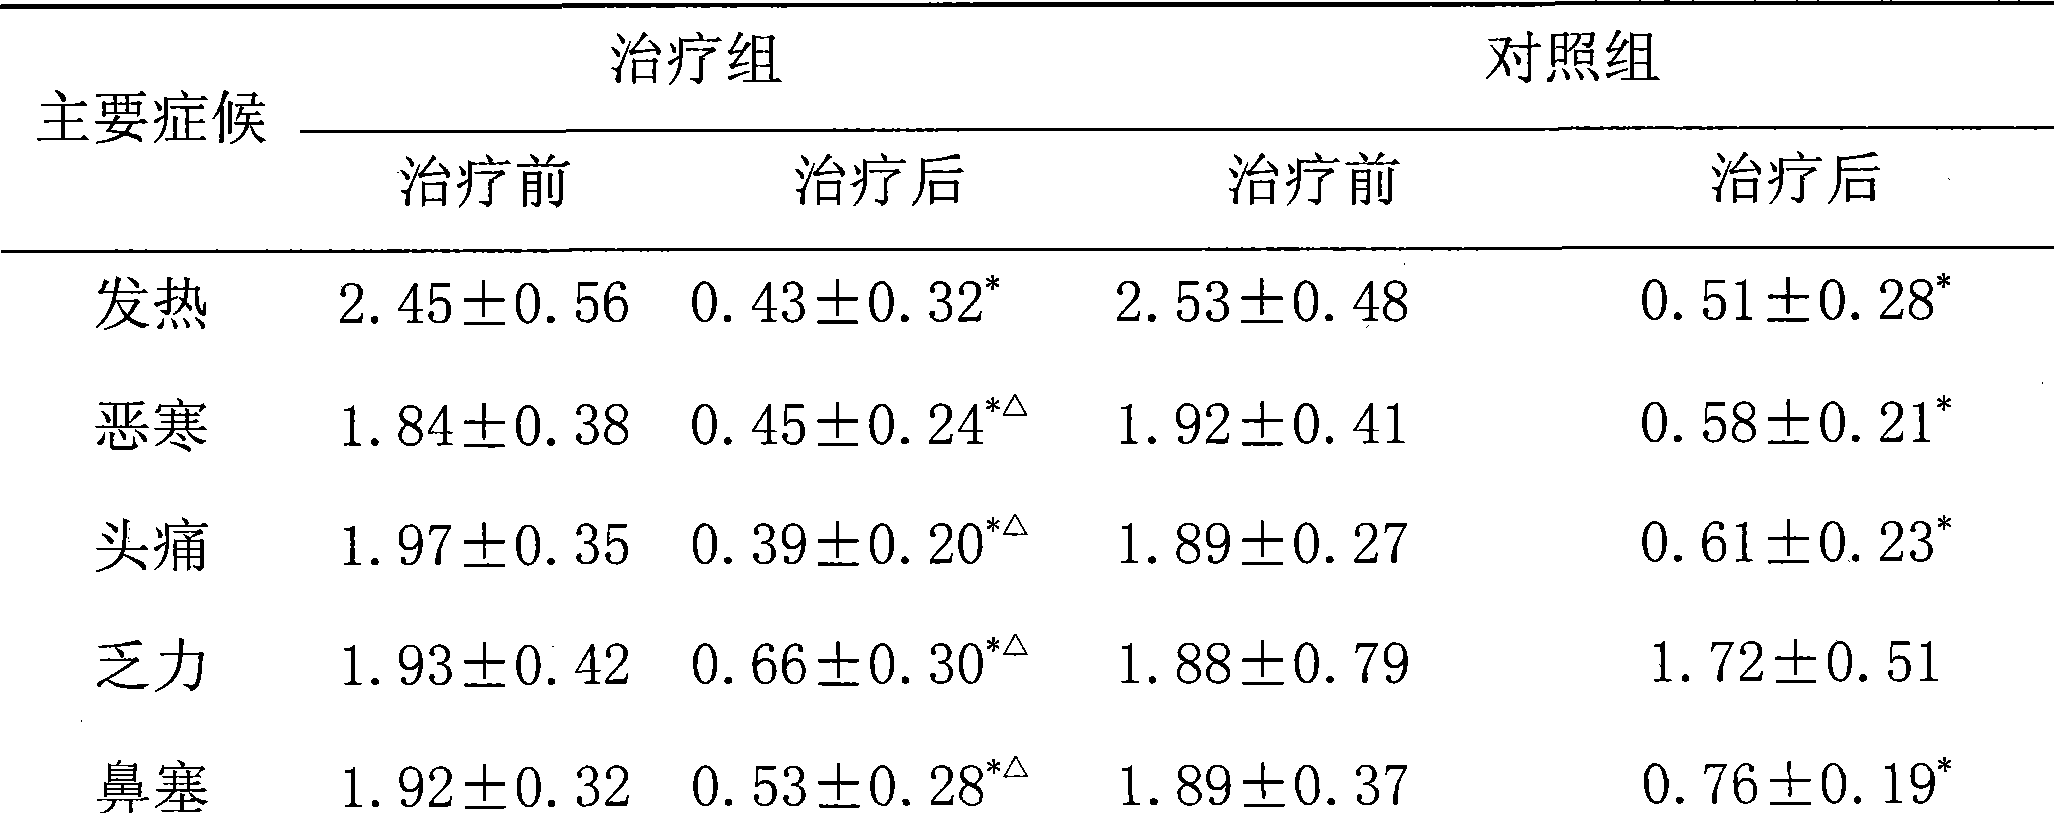 Prescription of Chinese herbal compound decoction containing honeysuckle flower and forsythia, radix bupleuri and cassia twig for treating influenza and preparation method